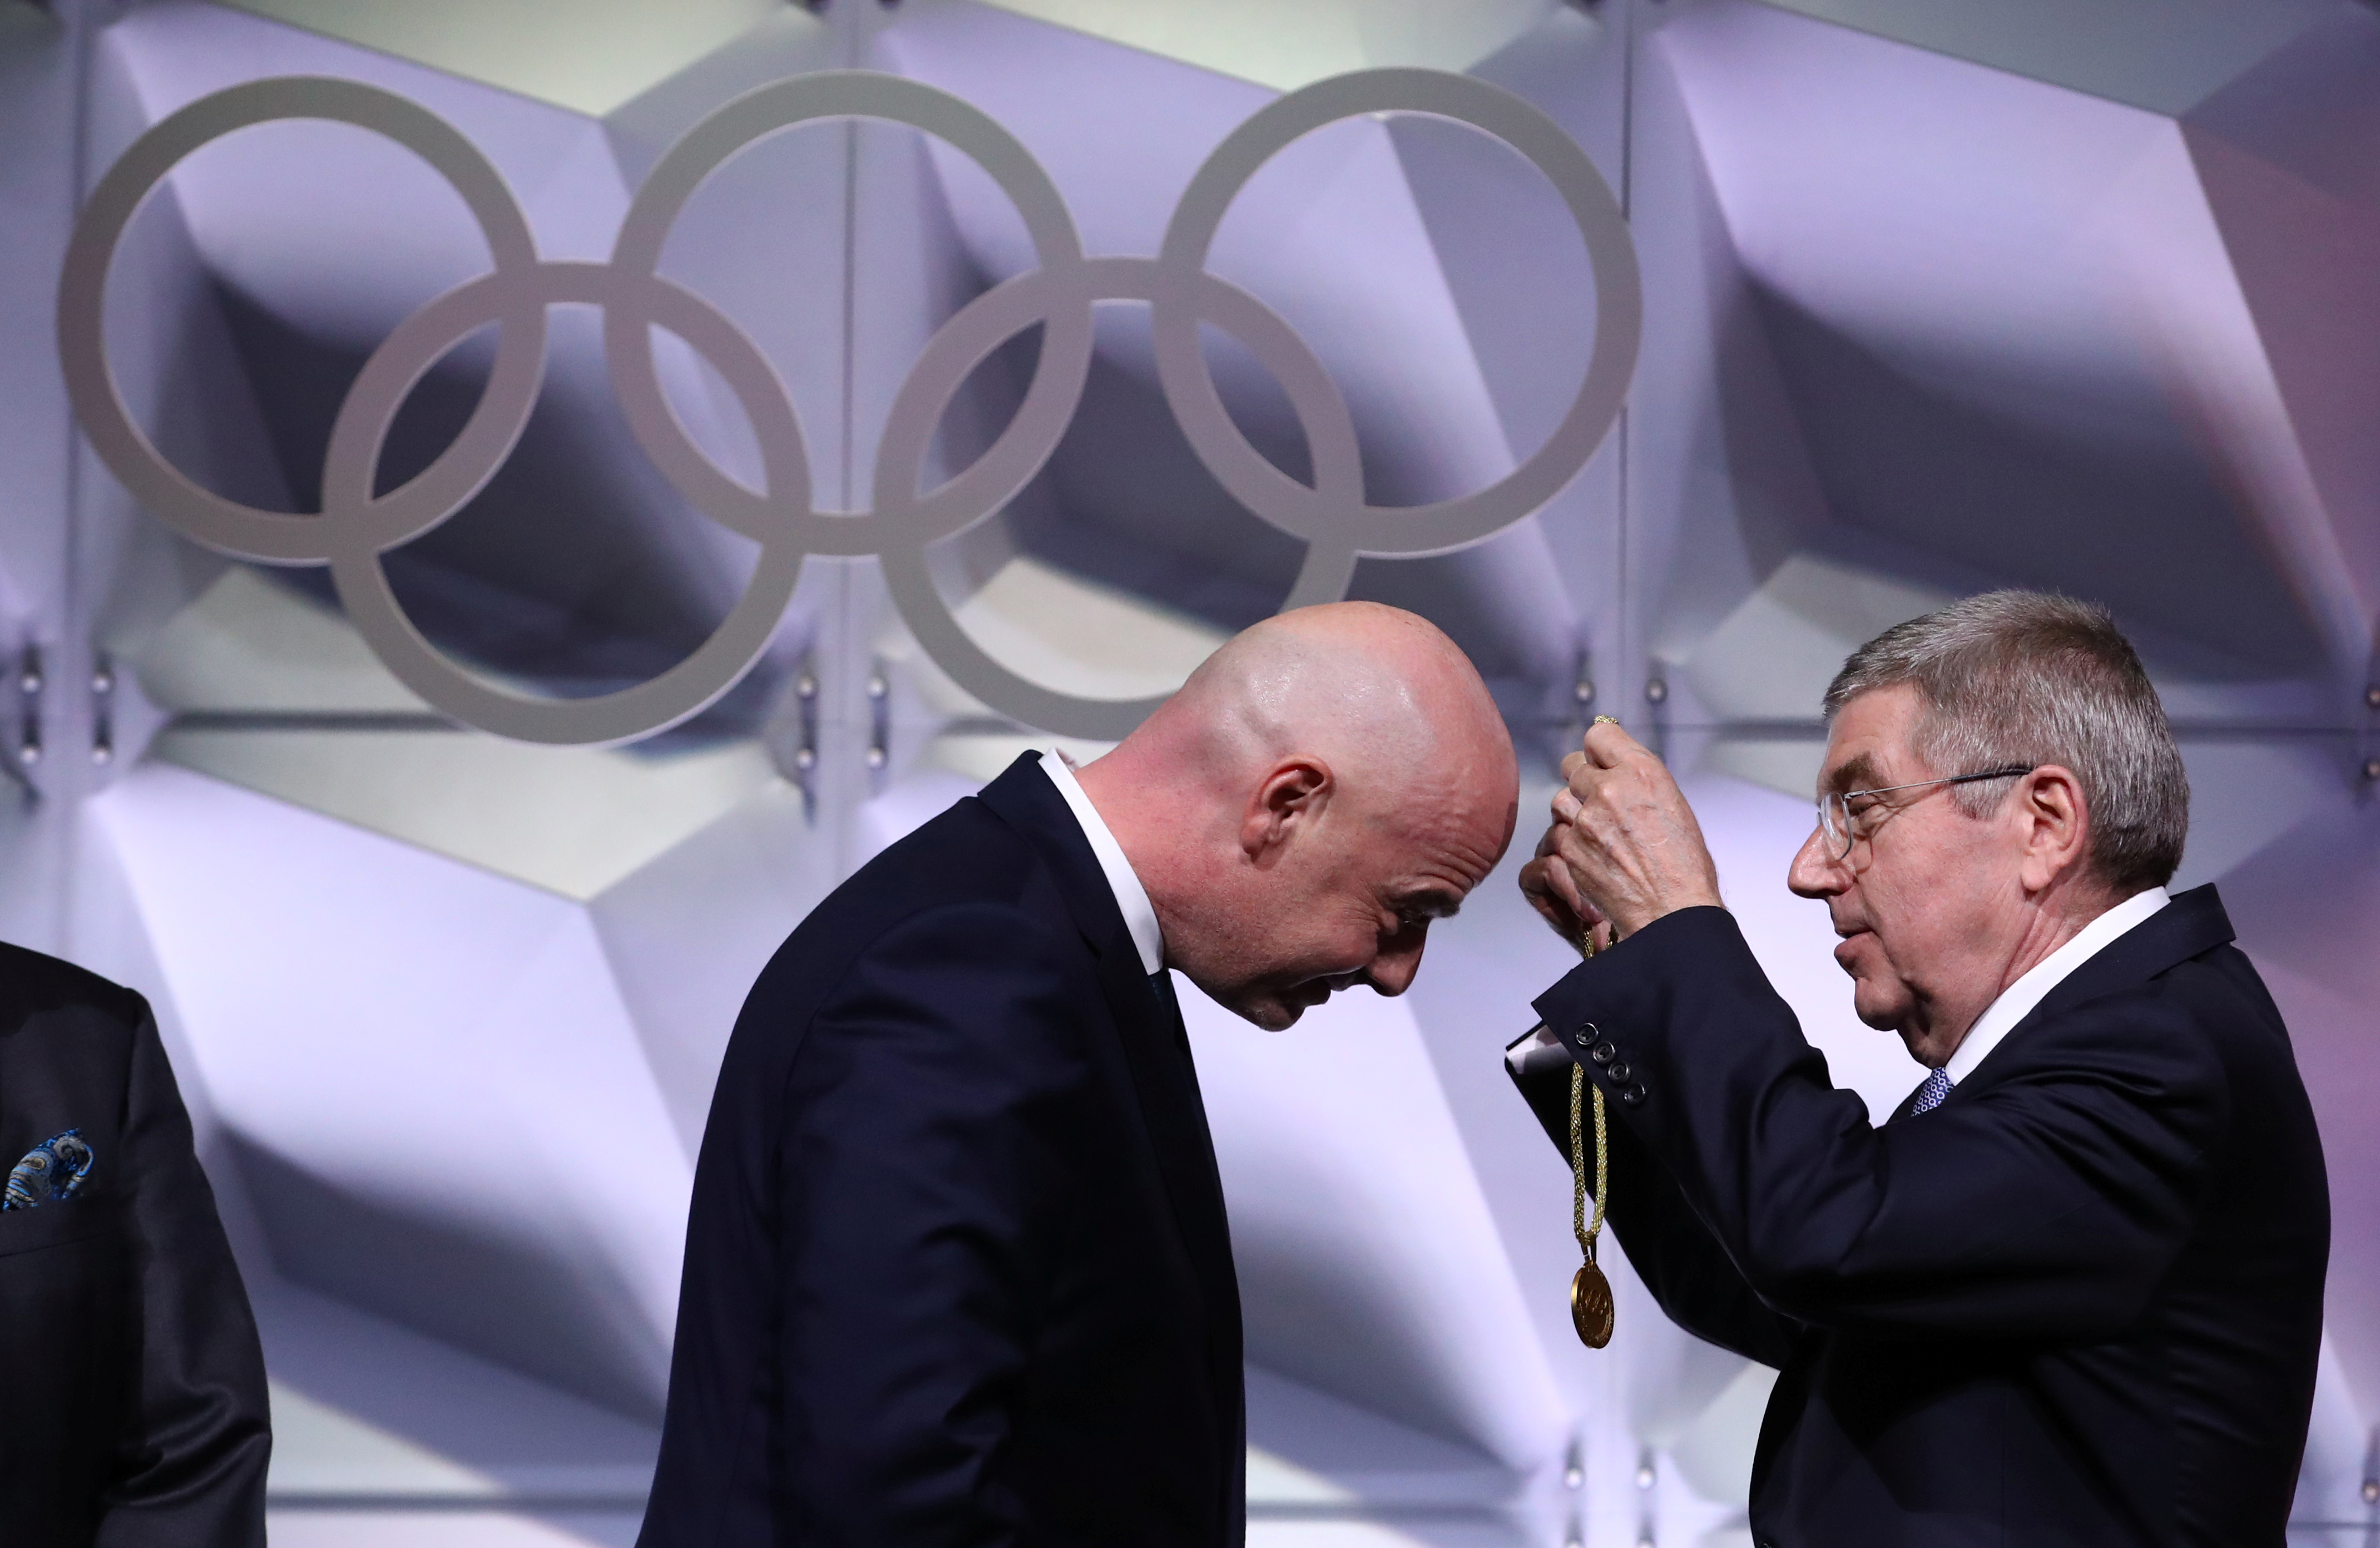 Thomas Bach, President of the International Olympic Committee (IOC) congratulates FIFA president Gianni Infantino after his election as IOC member during the 135th Session in Lausanne, Switzerland, January 10, 2020.  REUTERS/Denis Balibouse